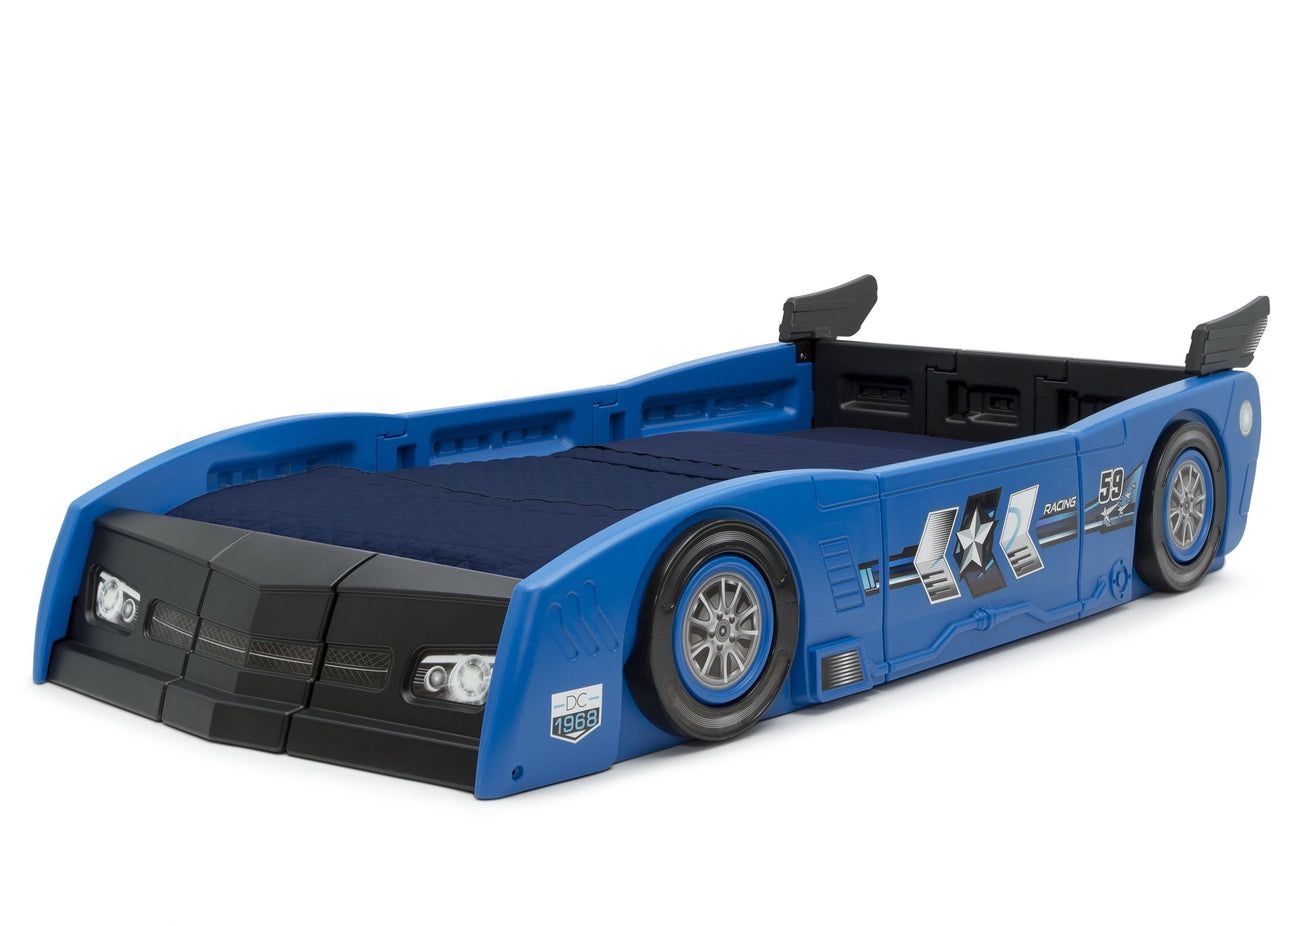 Grand Prix Race Car Toddler-to-Twin Bed